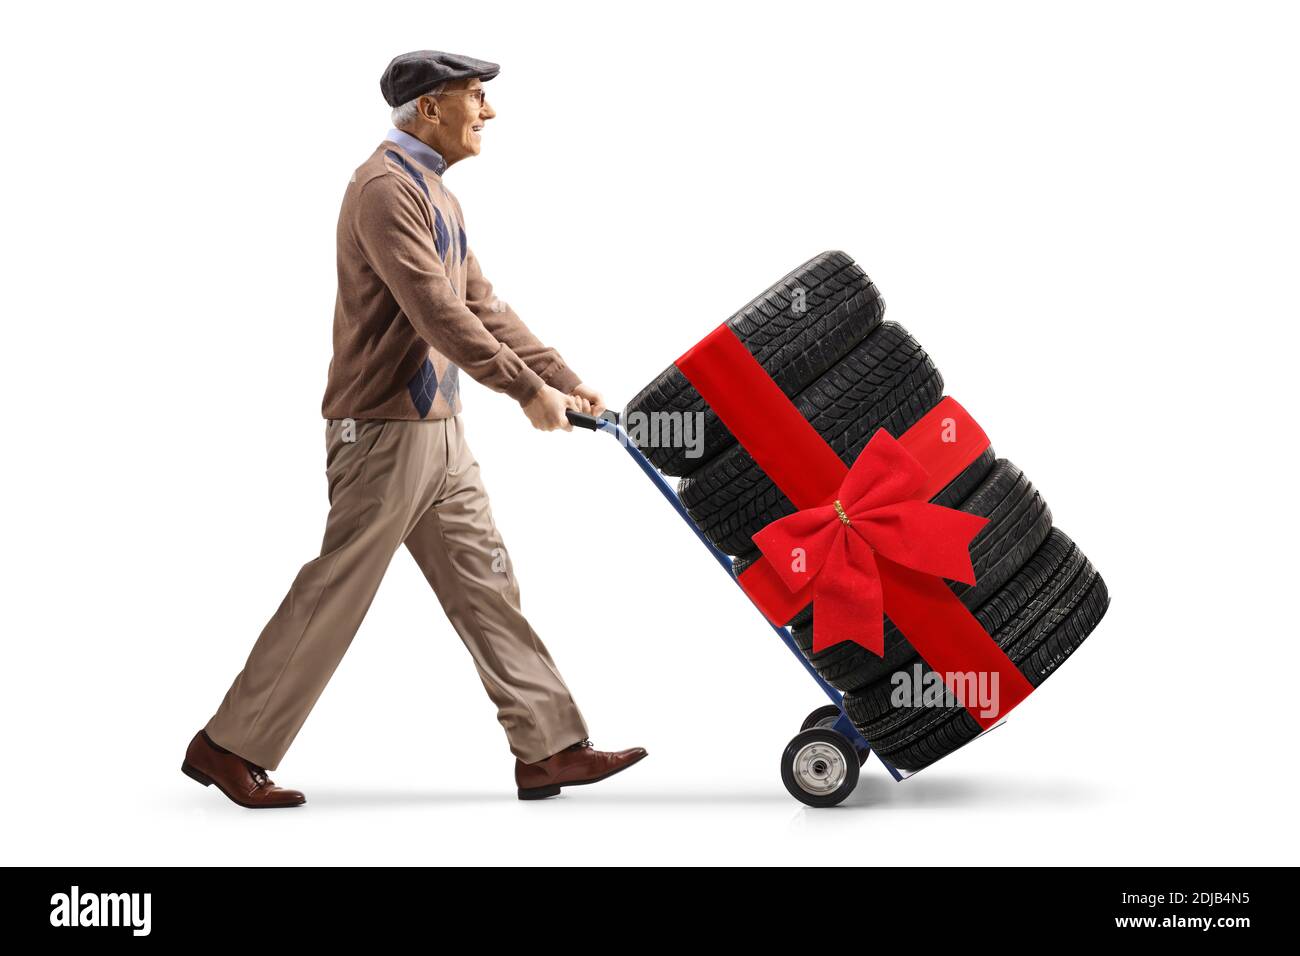 Full length profile shot of an elderly man pushing car tires with a red bow on a hand truck isolated on white background Stock Photo